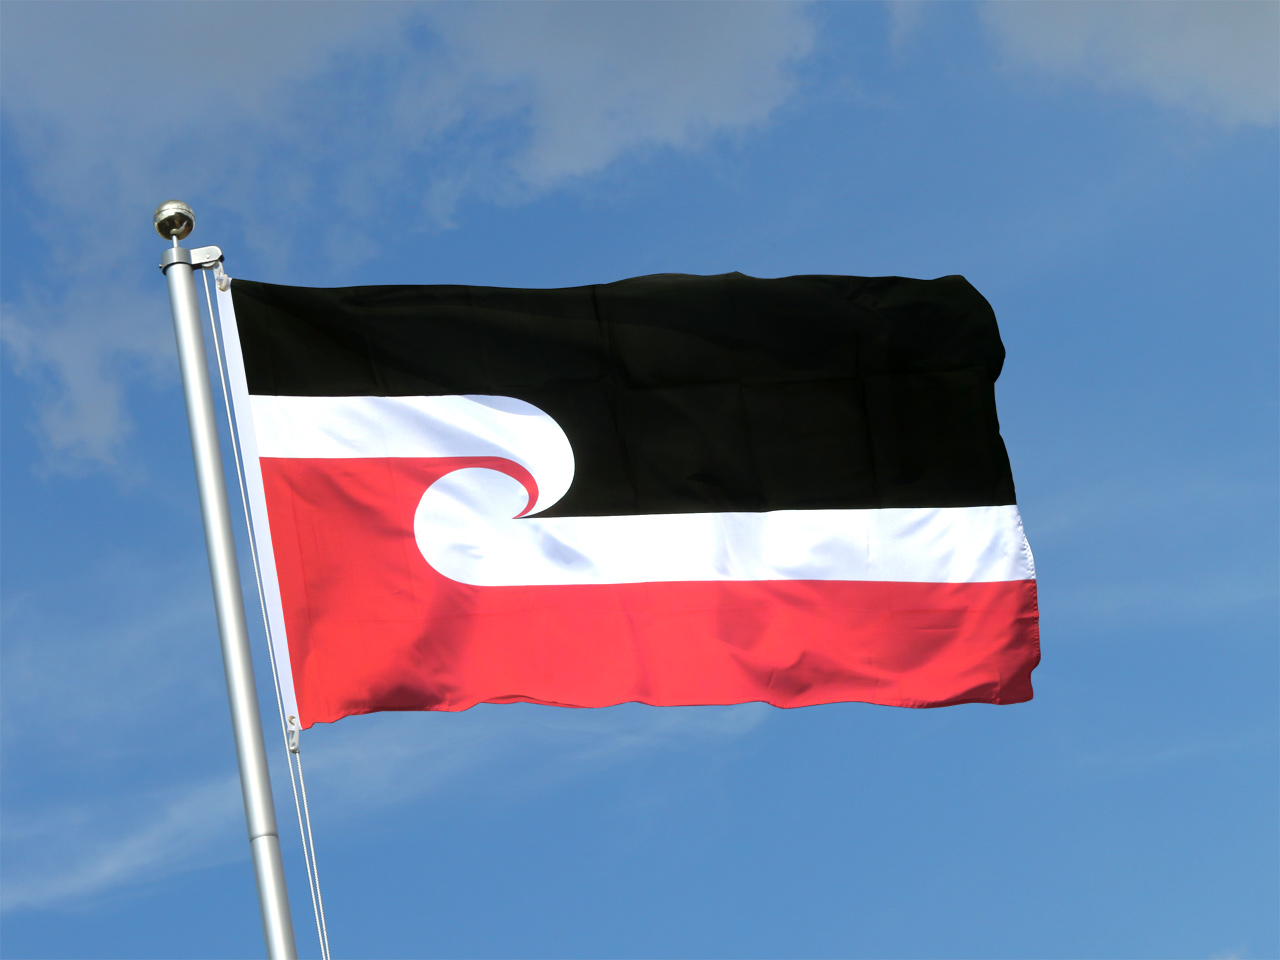 New Zealand Maori Flag For Sale Buy Online At Royal Flags